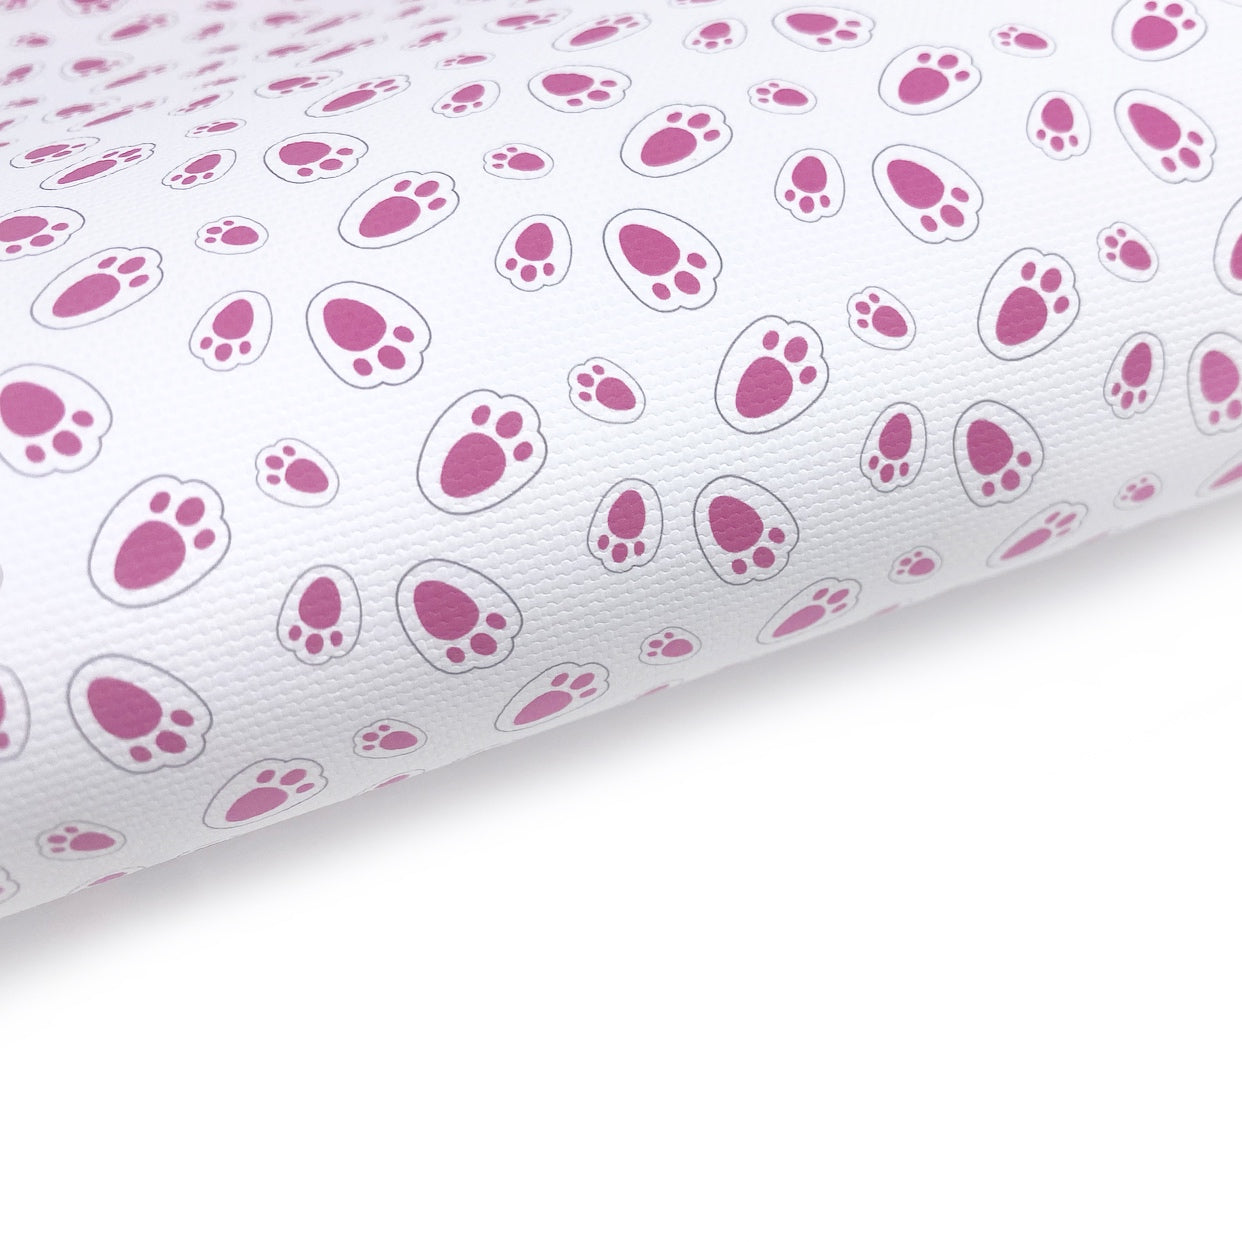 Bunny Paws Pink Lux Premium Printed Bow Fabrics